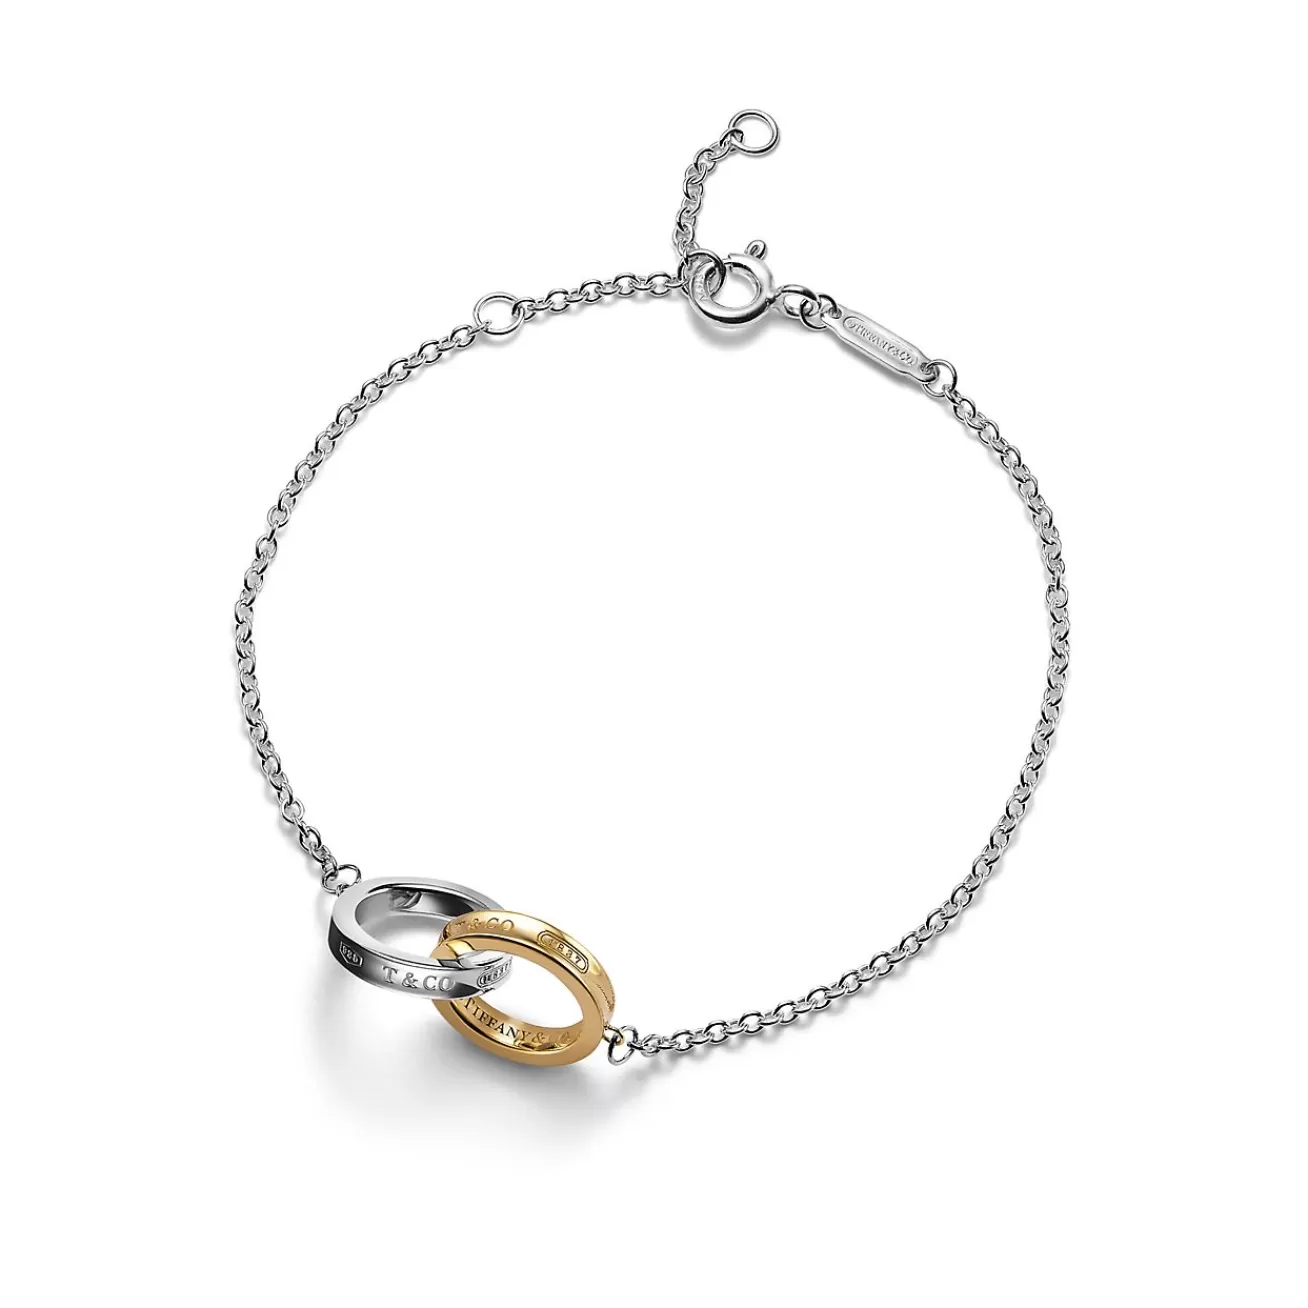 Tiffany & Co. Tiffany 1837® Interlocking Circles Chain Bracelet in Sterling Silver and Yellow | ^ Bracelets | Gifts for Her